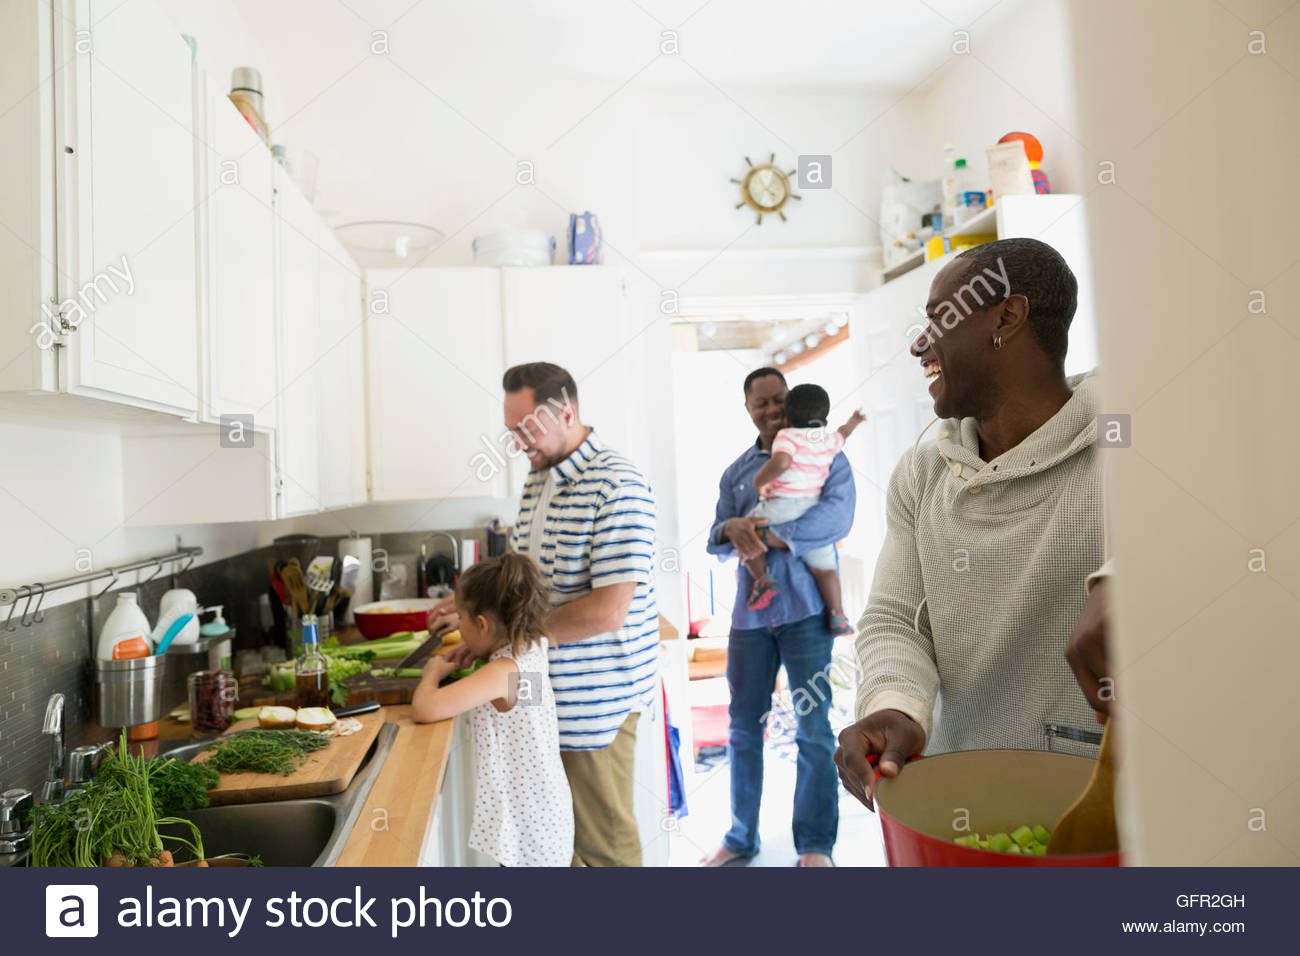 Fathers and children cooking in kitchen Stock Photo